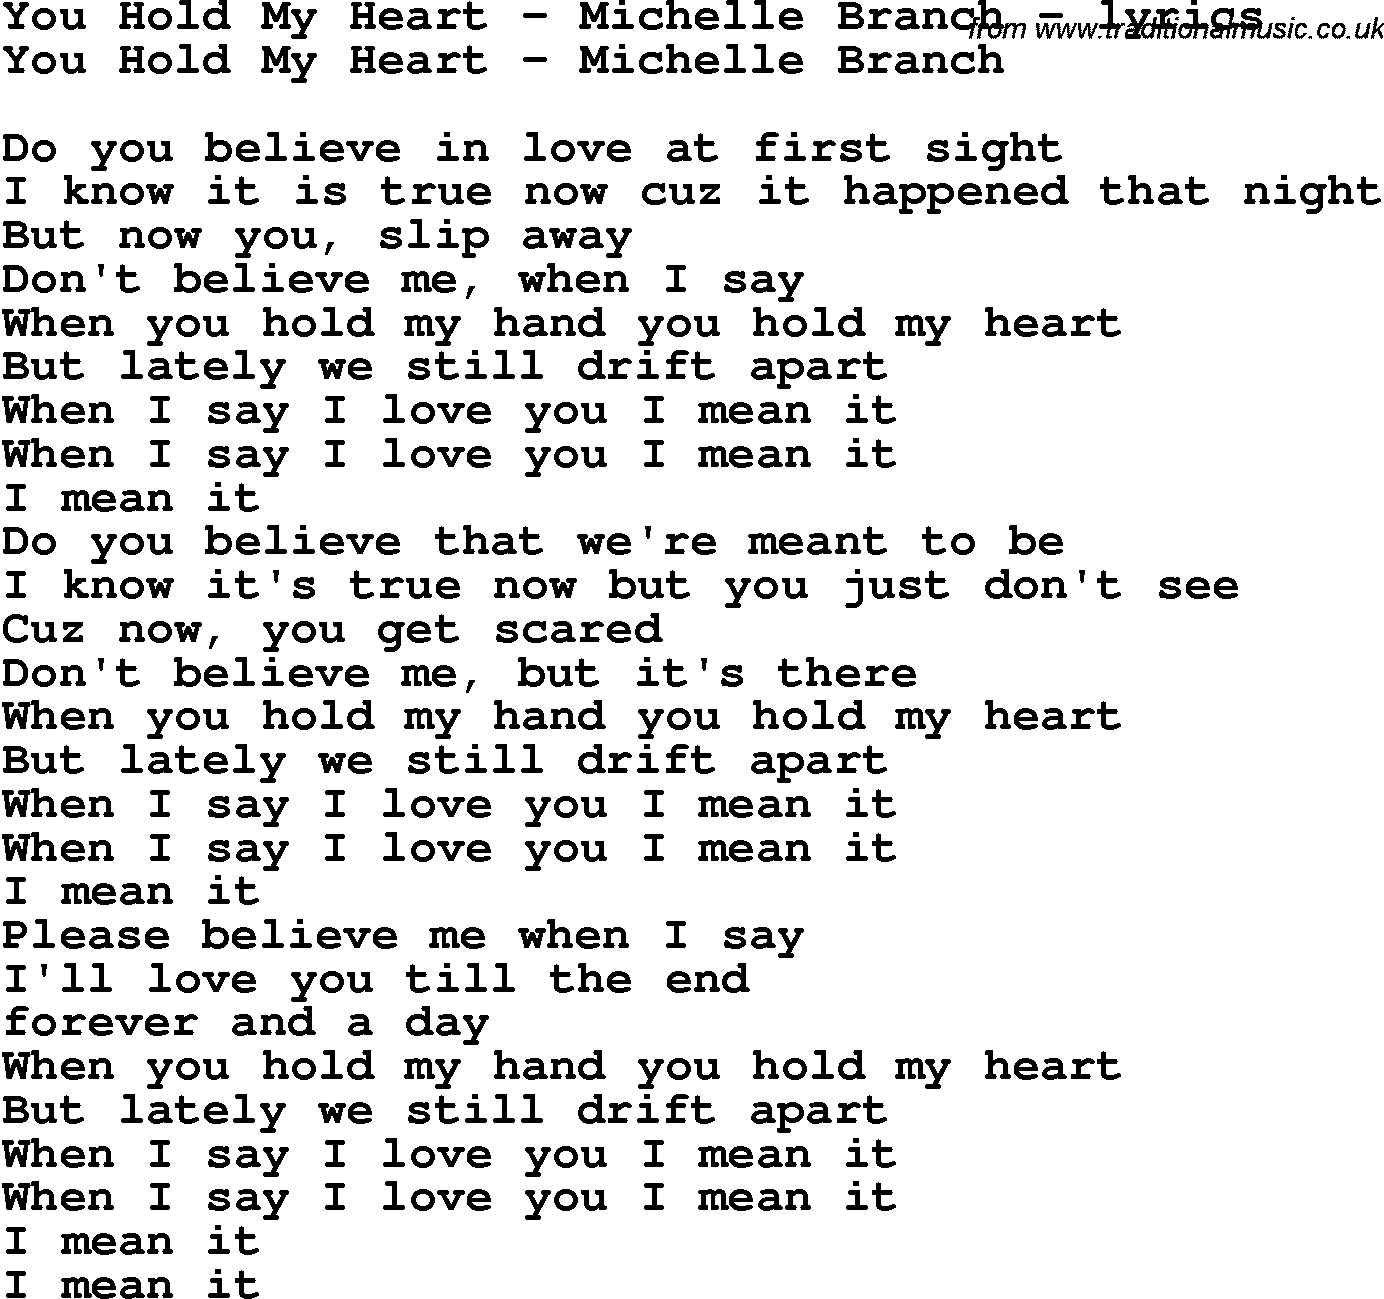 Love Song Lyrics for: You Hold My Heart - Michelle Branch